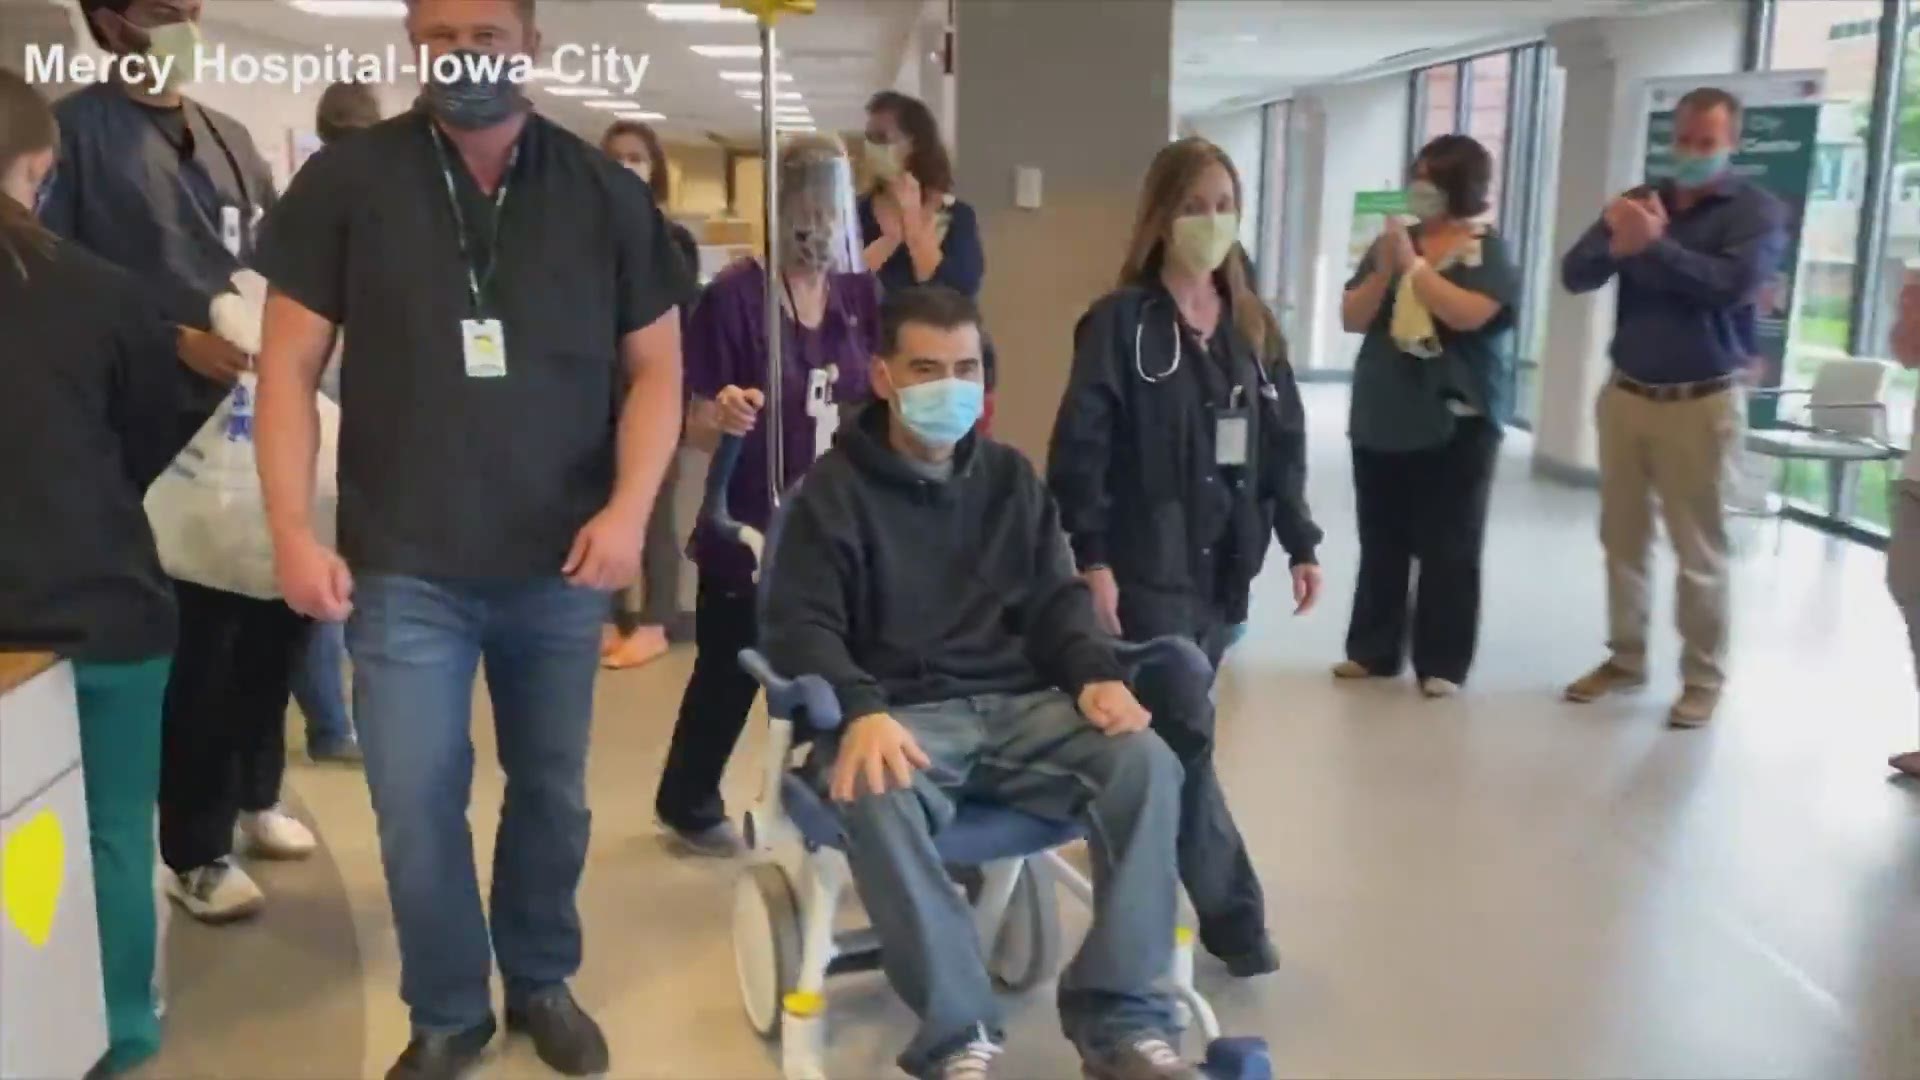 Thousands of Iowans have recovered from coronavirus and are being released from the hospital